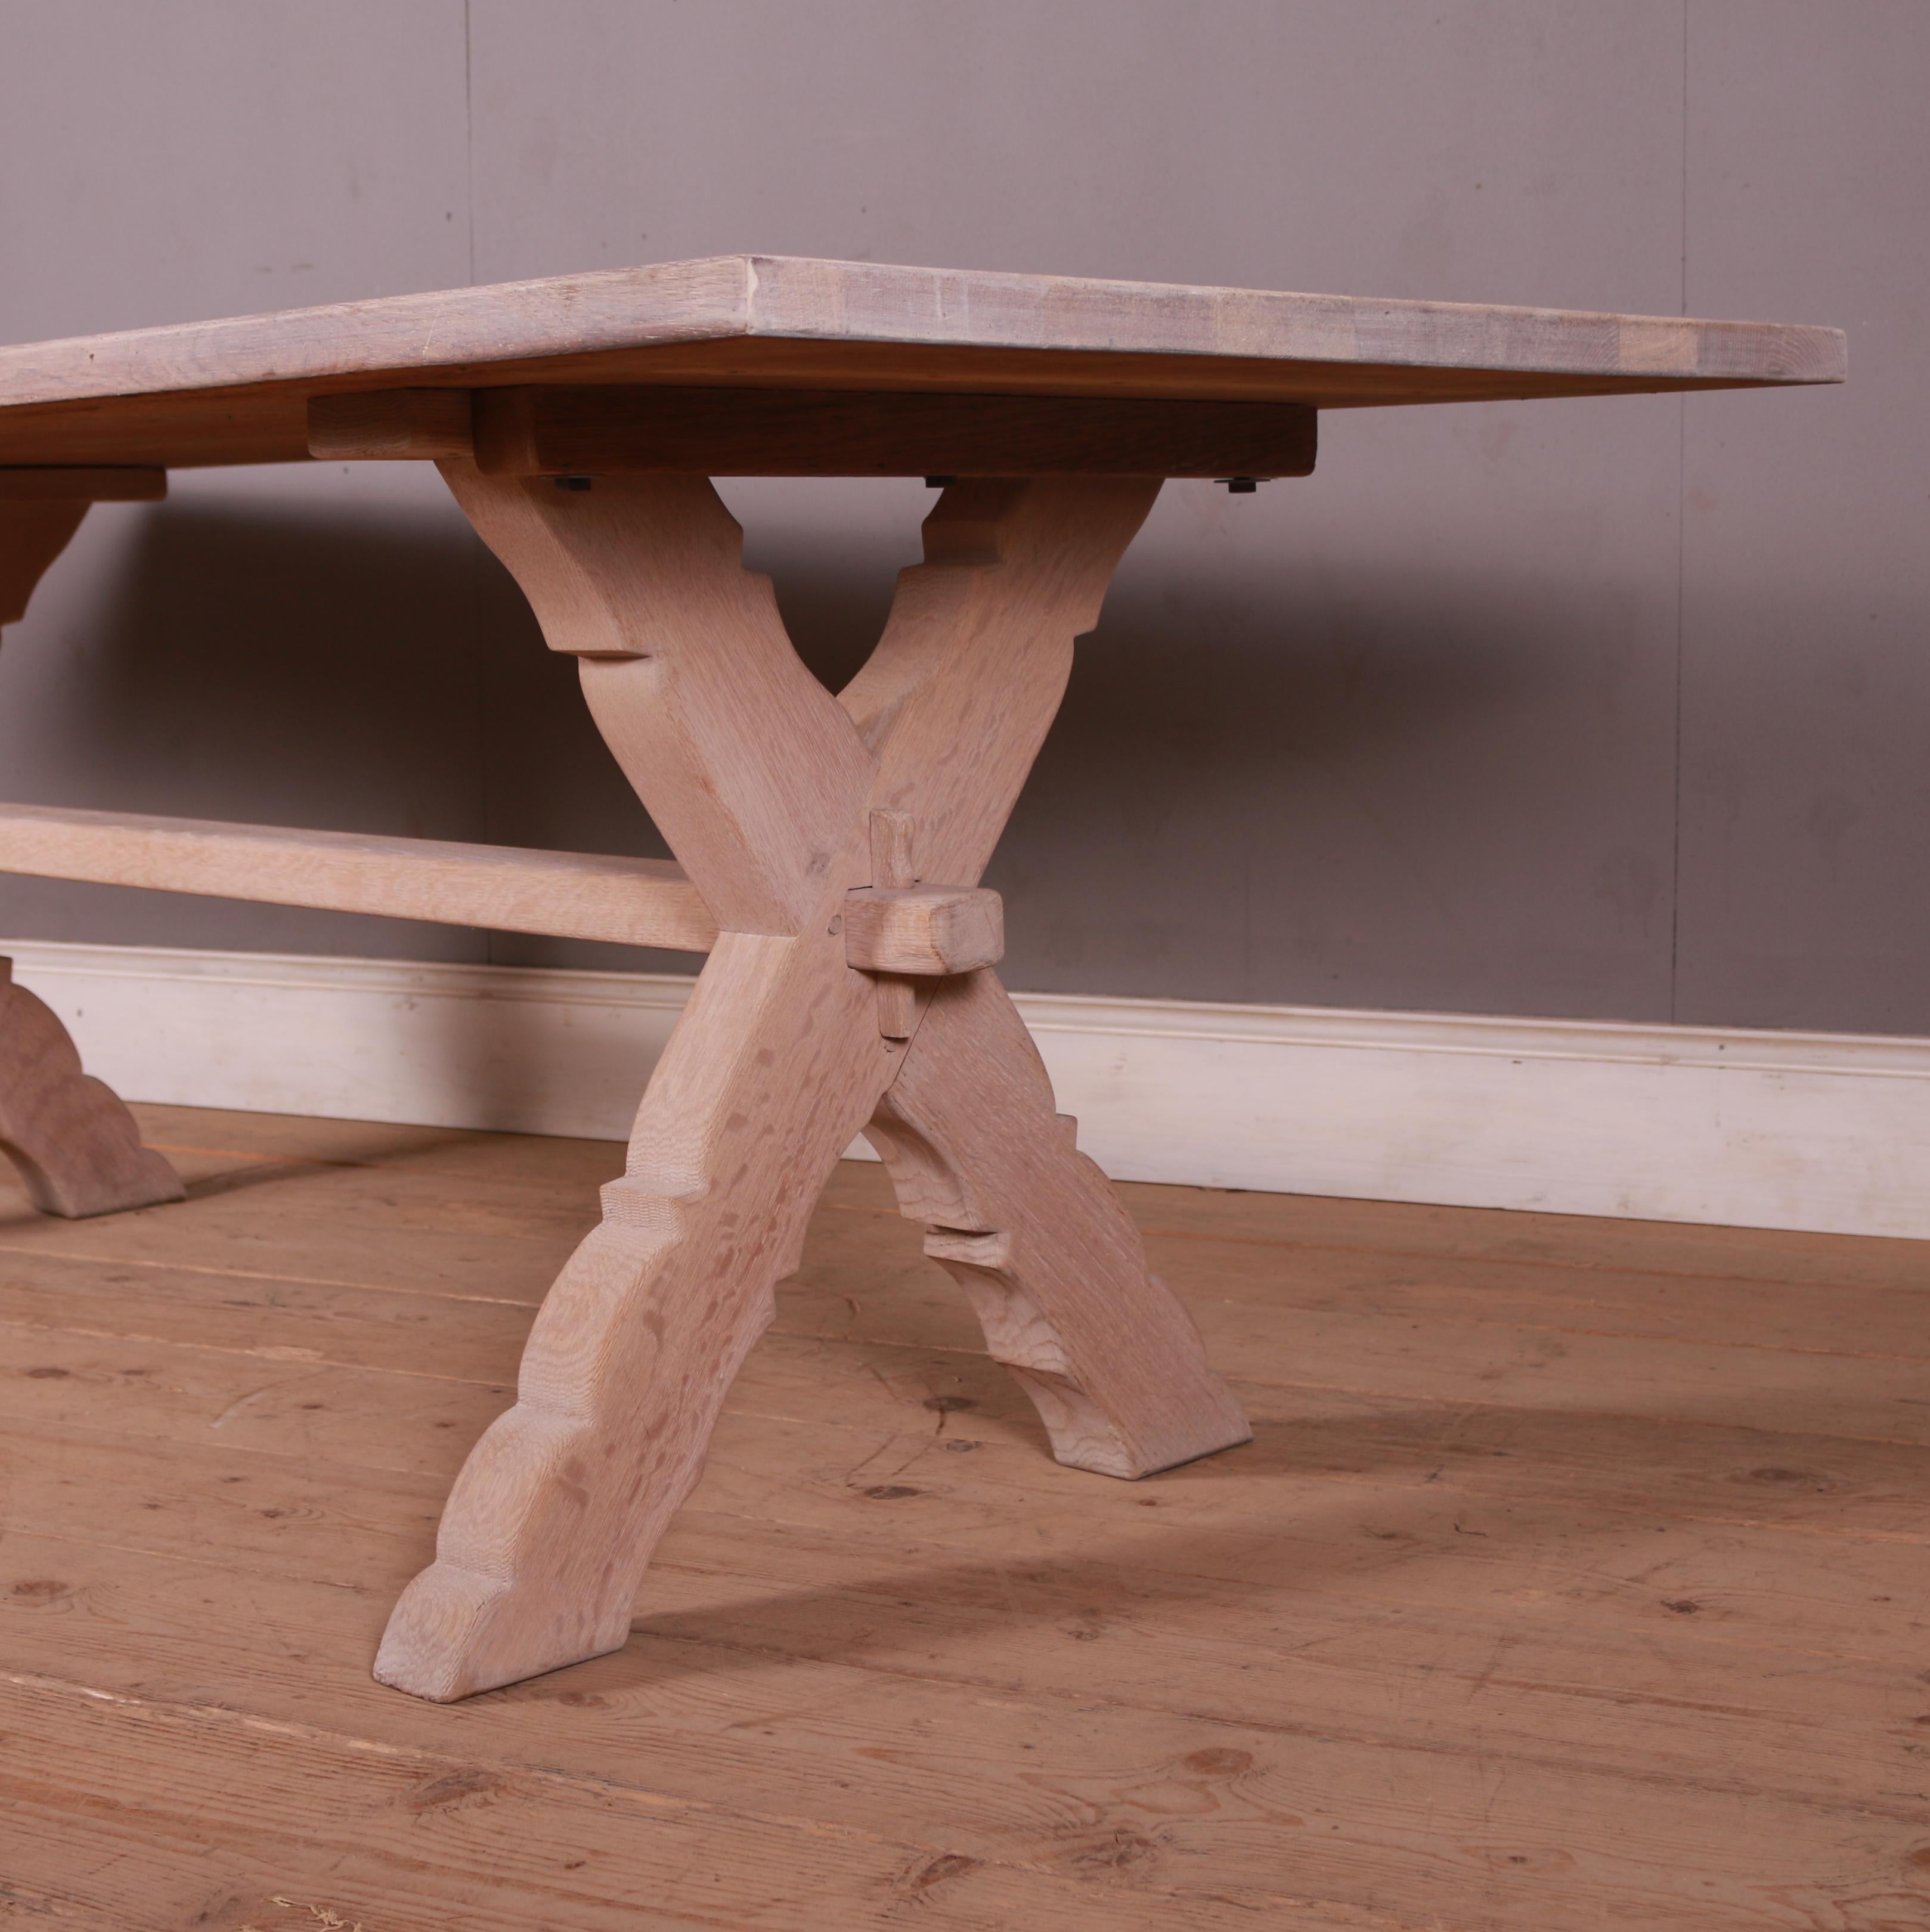 Early 20th c French bleached oak trestle table with shaped legs. 1910.

Dismantled dimensions: 210 W x 85 D x 14 H cms.

Dimensions
82.5 inches (210 cms) wide
33.5 inches (85 cms) deep
28.5 inches (72 cms) high.

 